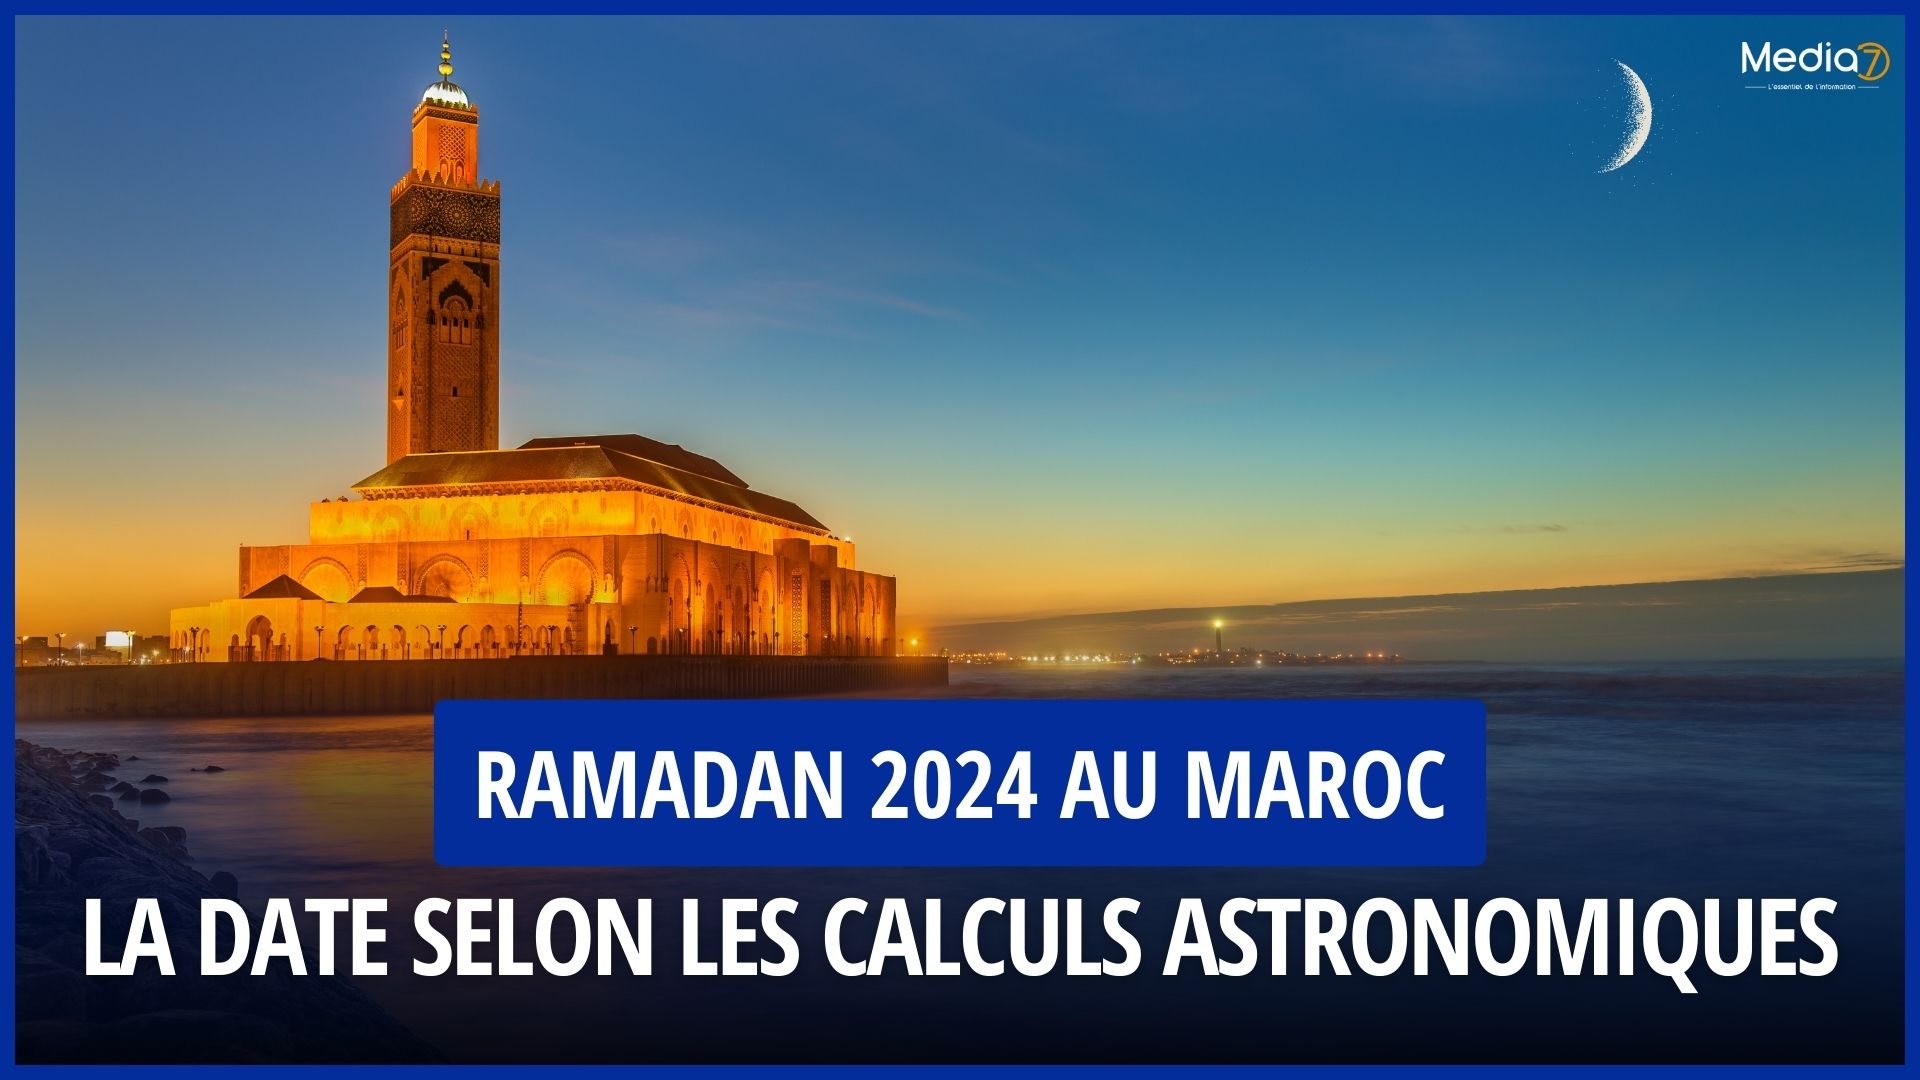 Ramadan 2024 in Morocco: Start and end dates according to astronomical calculations